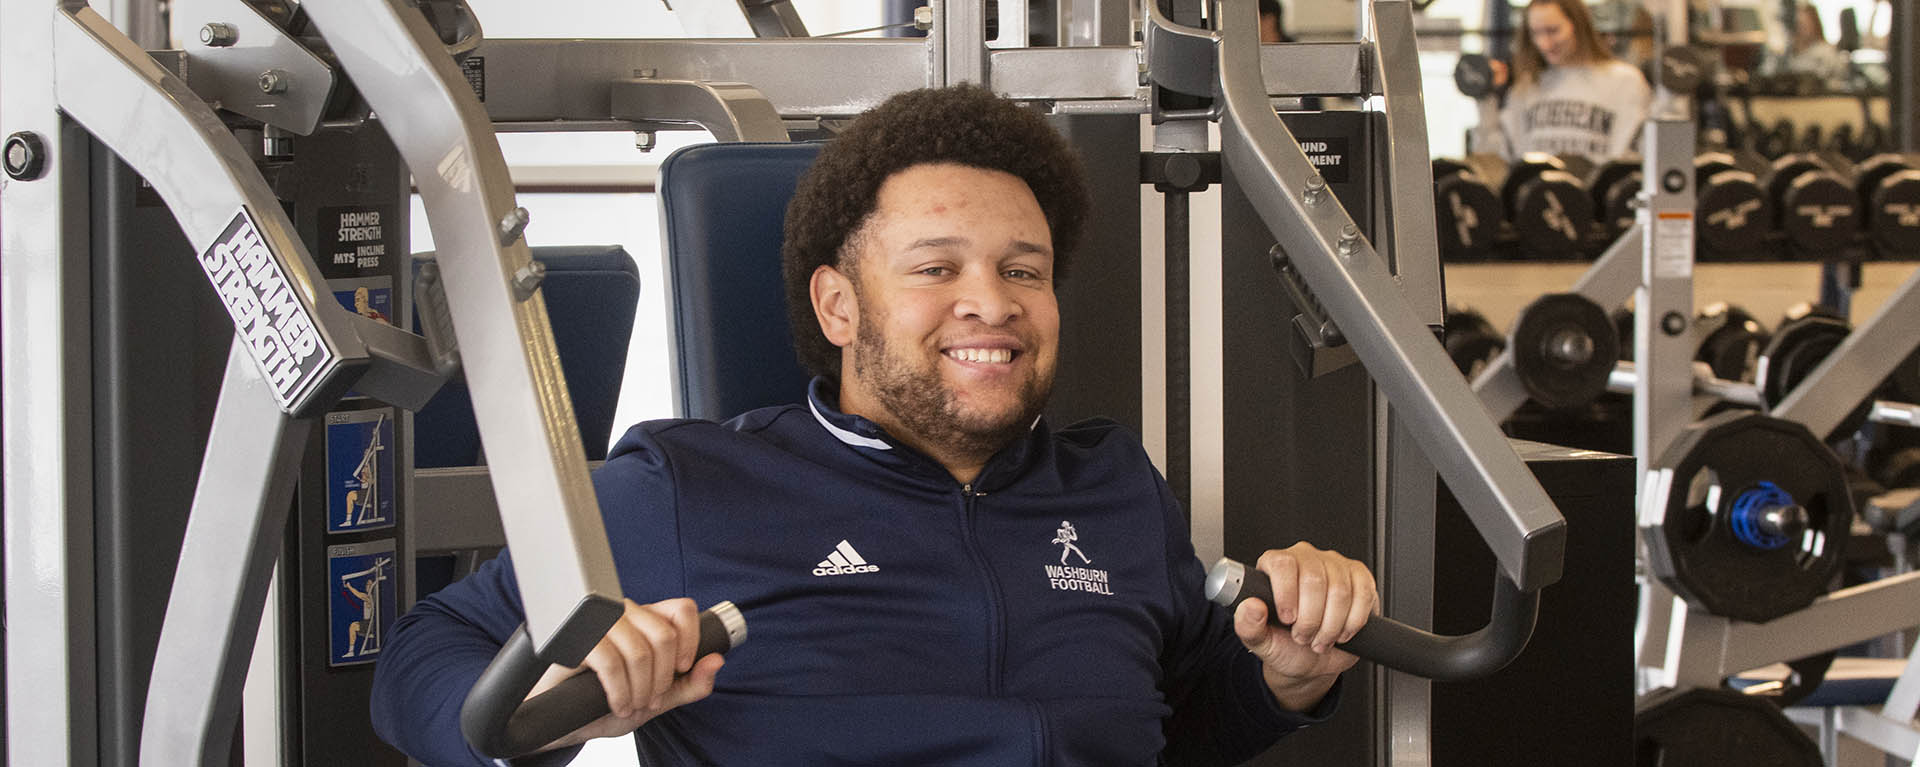 A student smiles while using a strength machine at the Rec center.